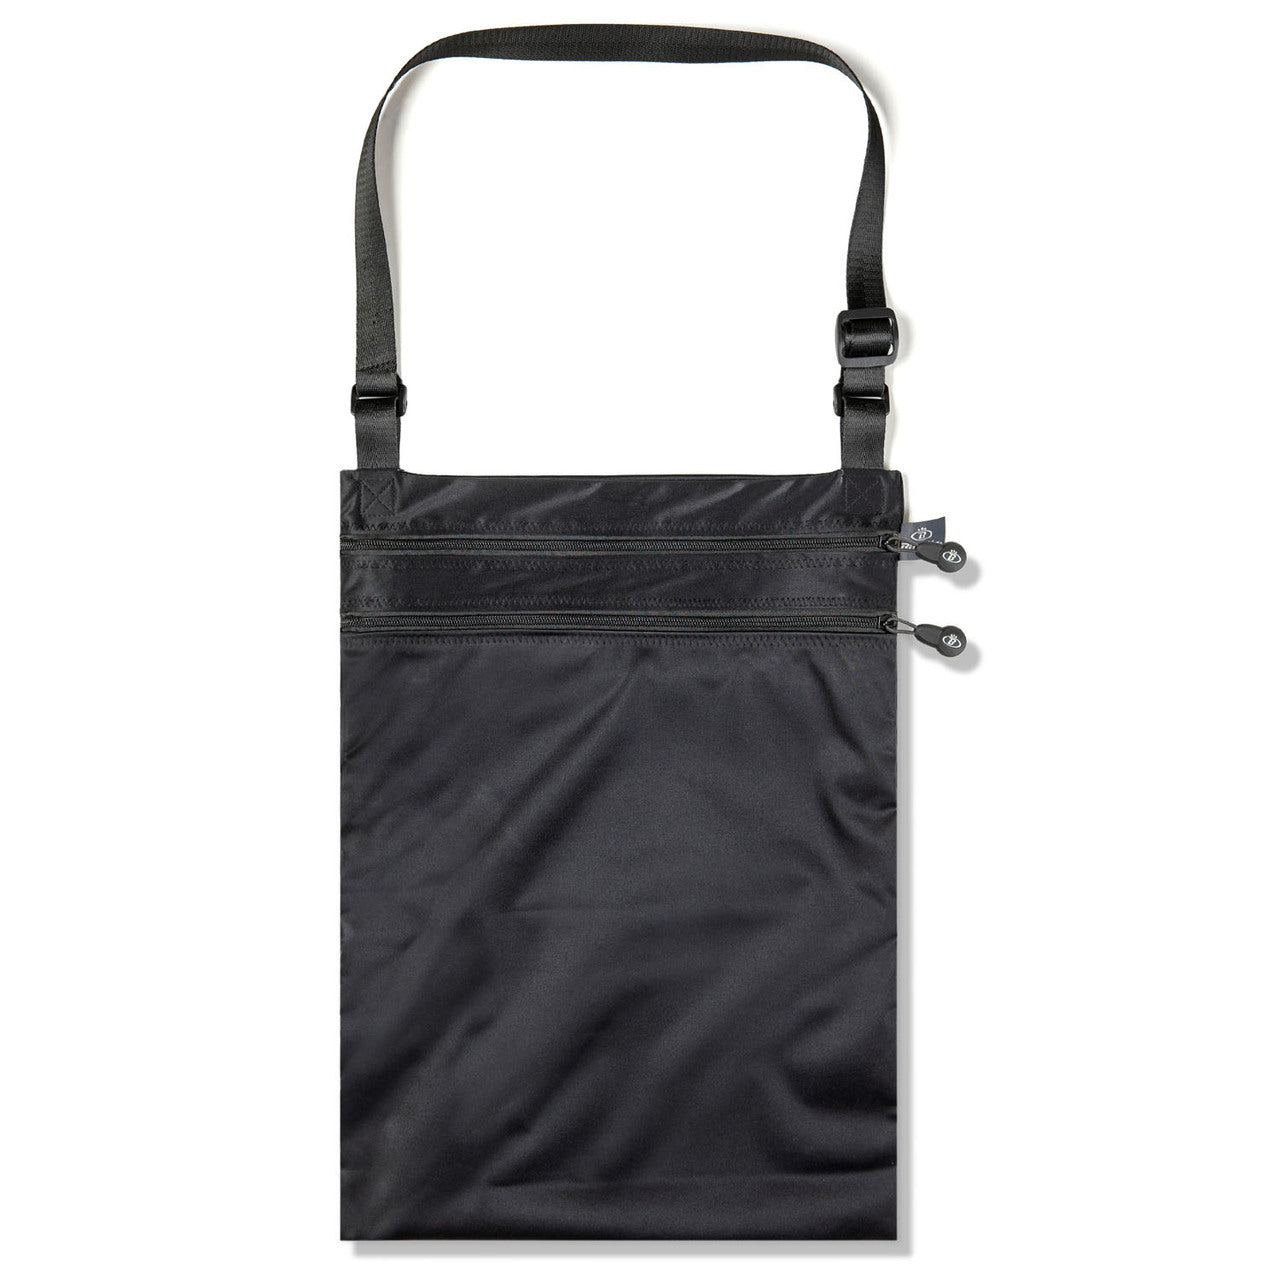 Carry Bag for our Neoprene Changing Mat!